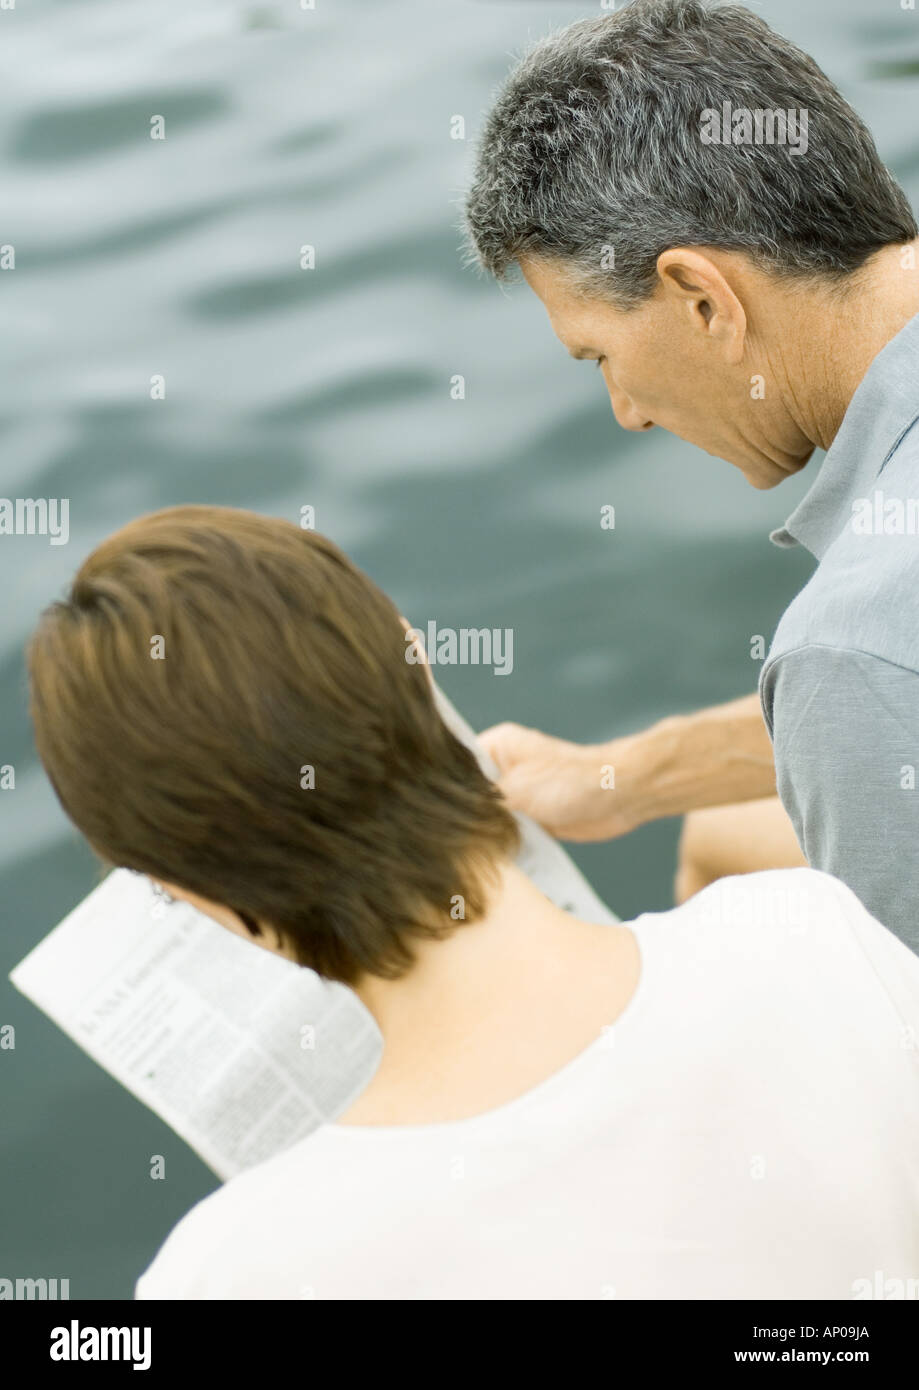 Couple reading newspaper together, water in background Stock Photo